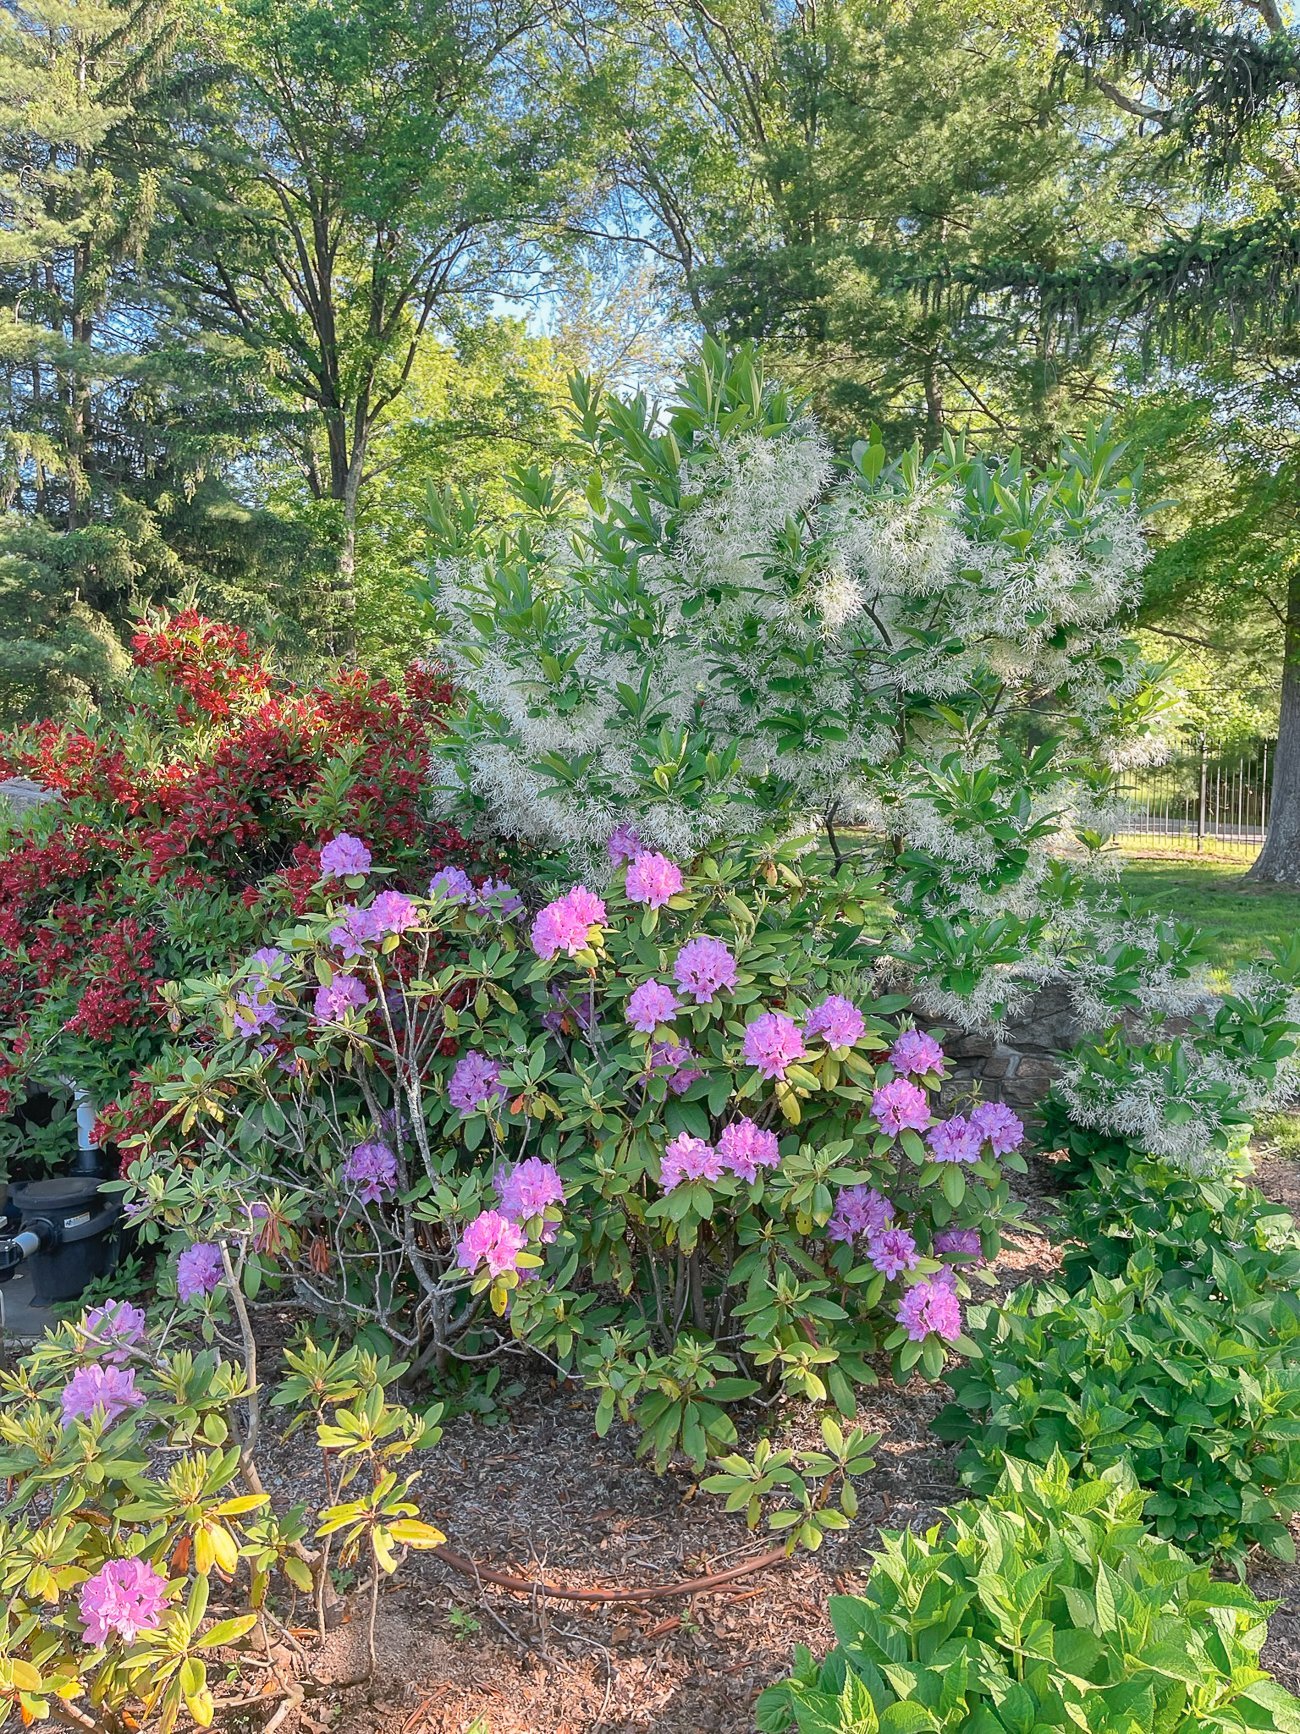 rhododendron, weigela and white fringe tree in flower